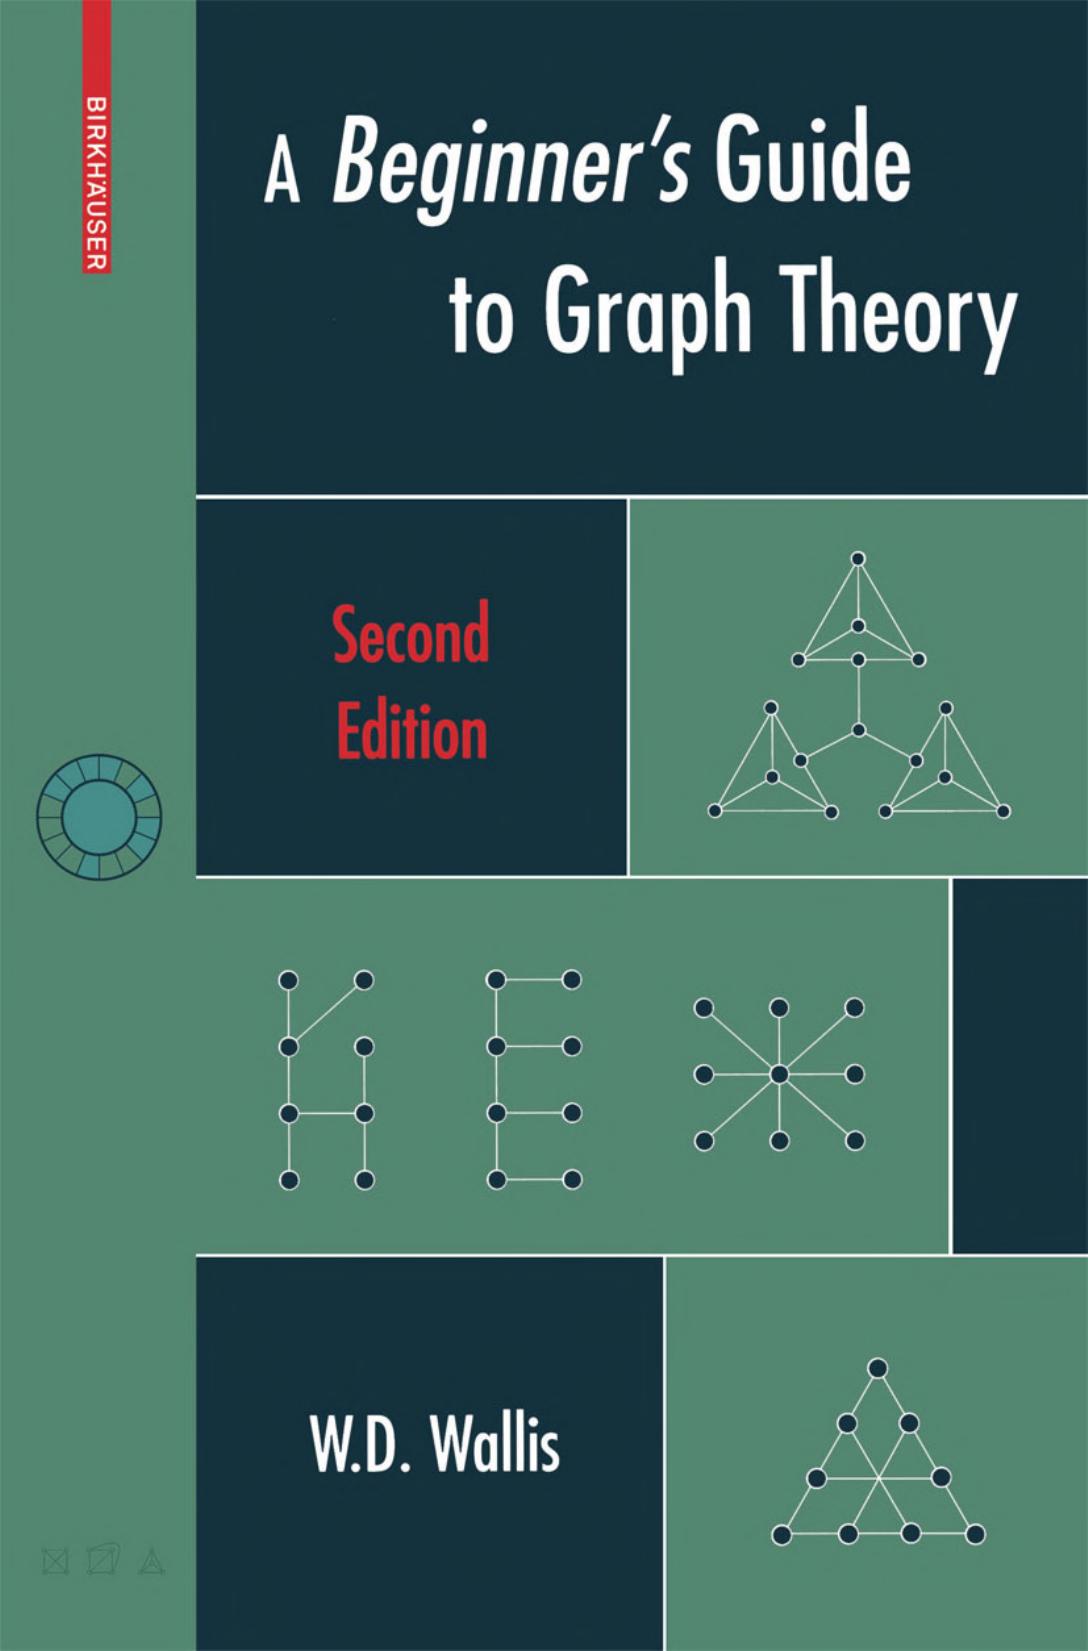 A Beginner's Guide to Graph Theory